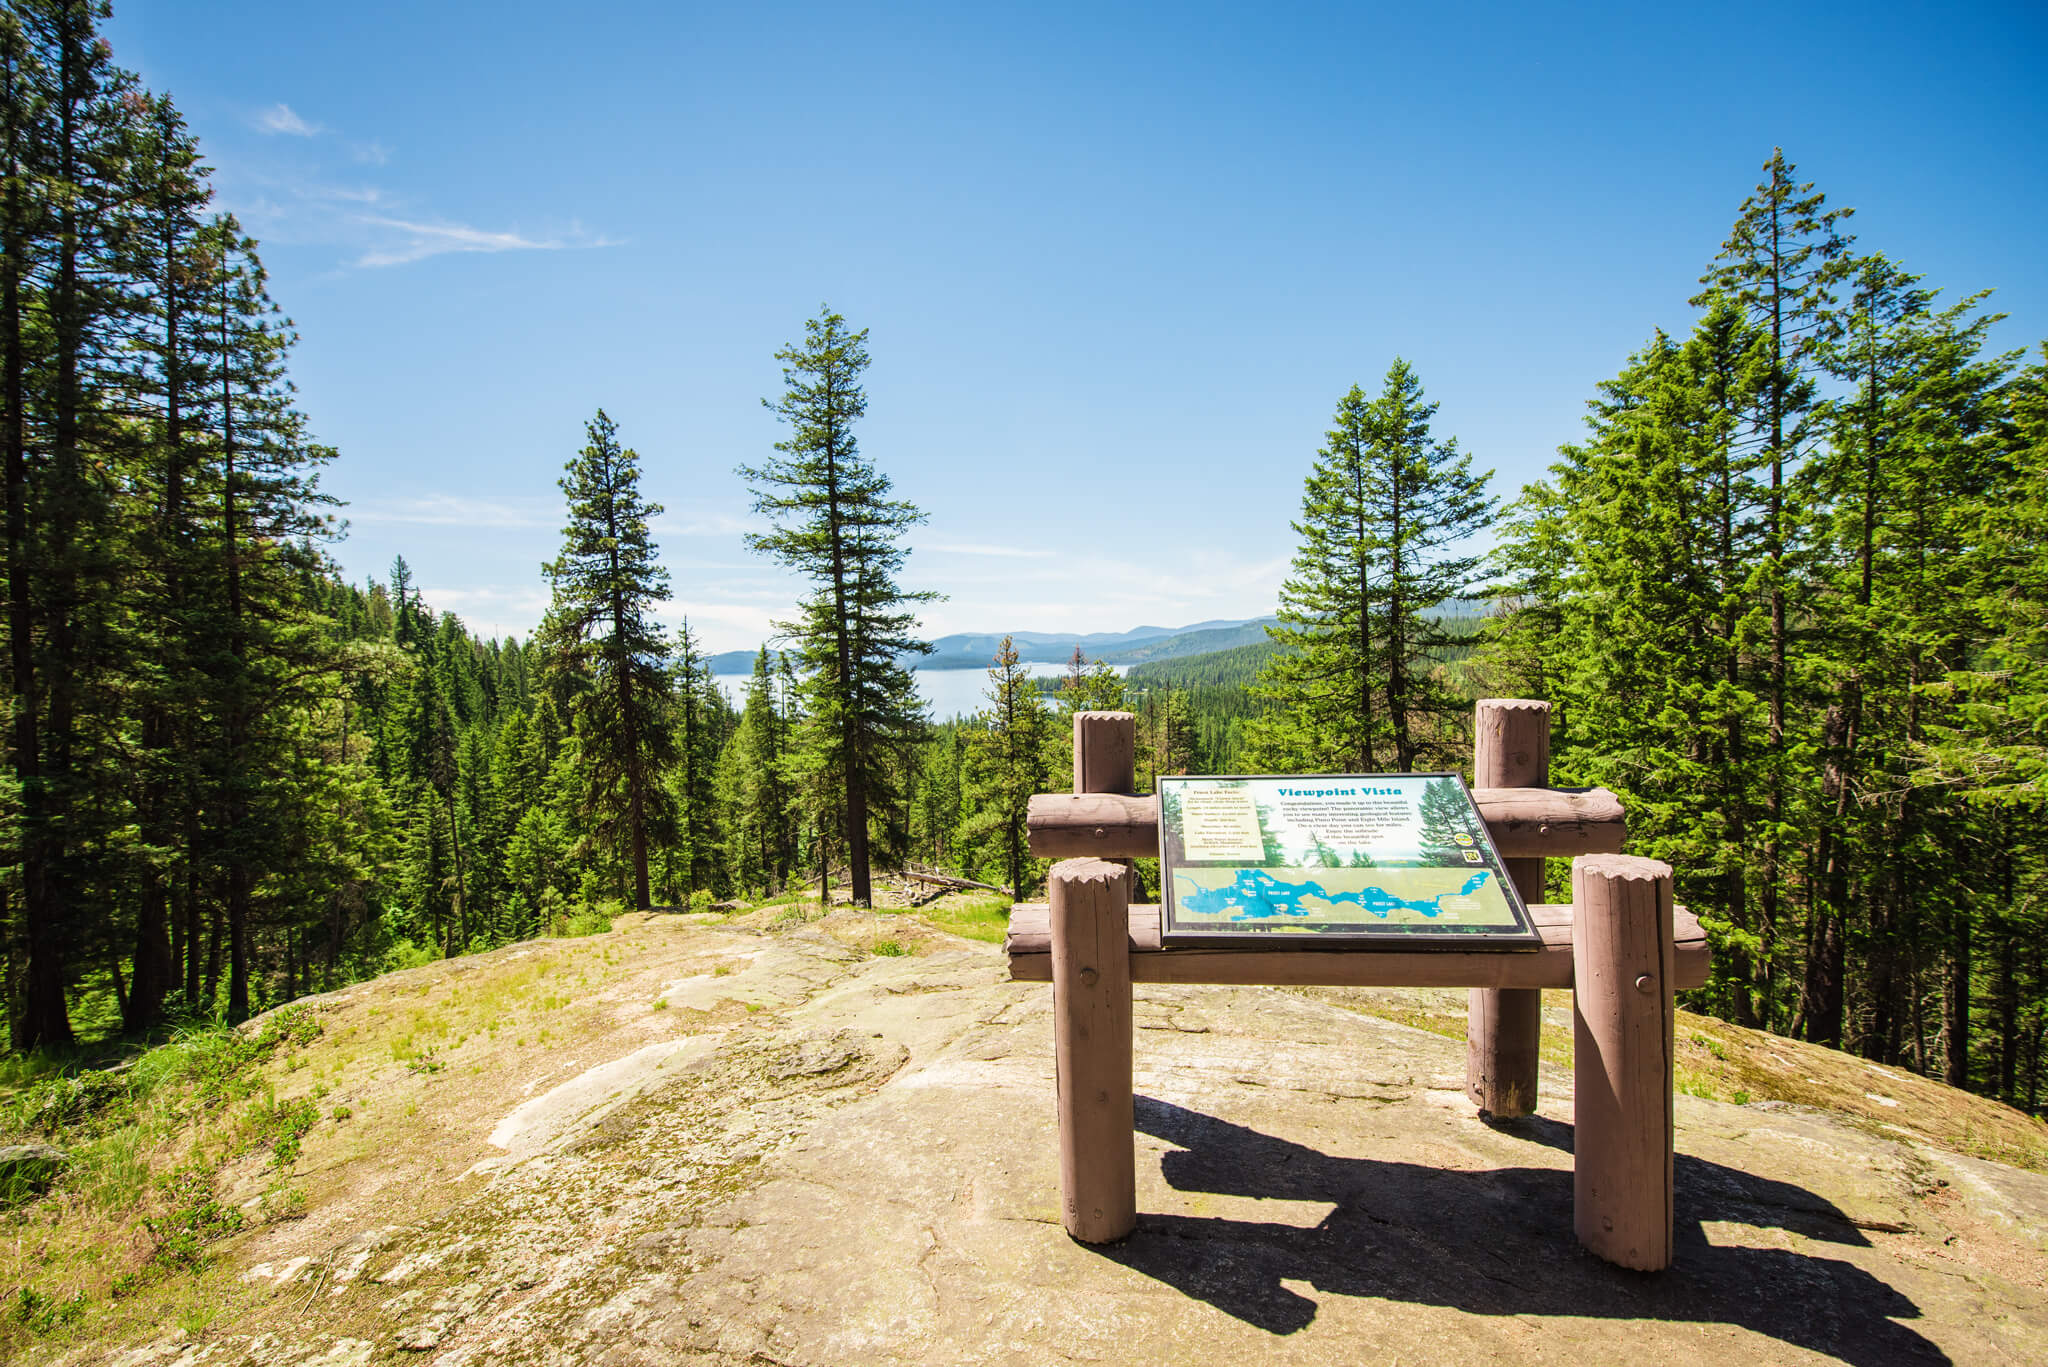 Experience the Beauty of Idaho’s State Parks